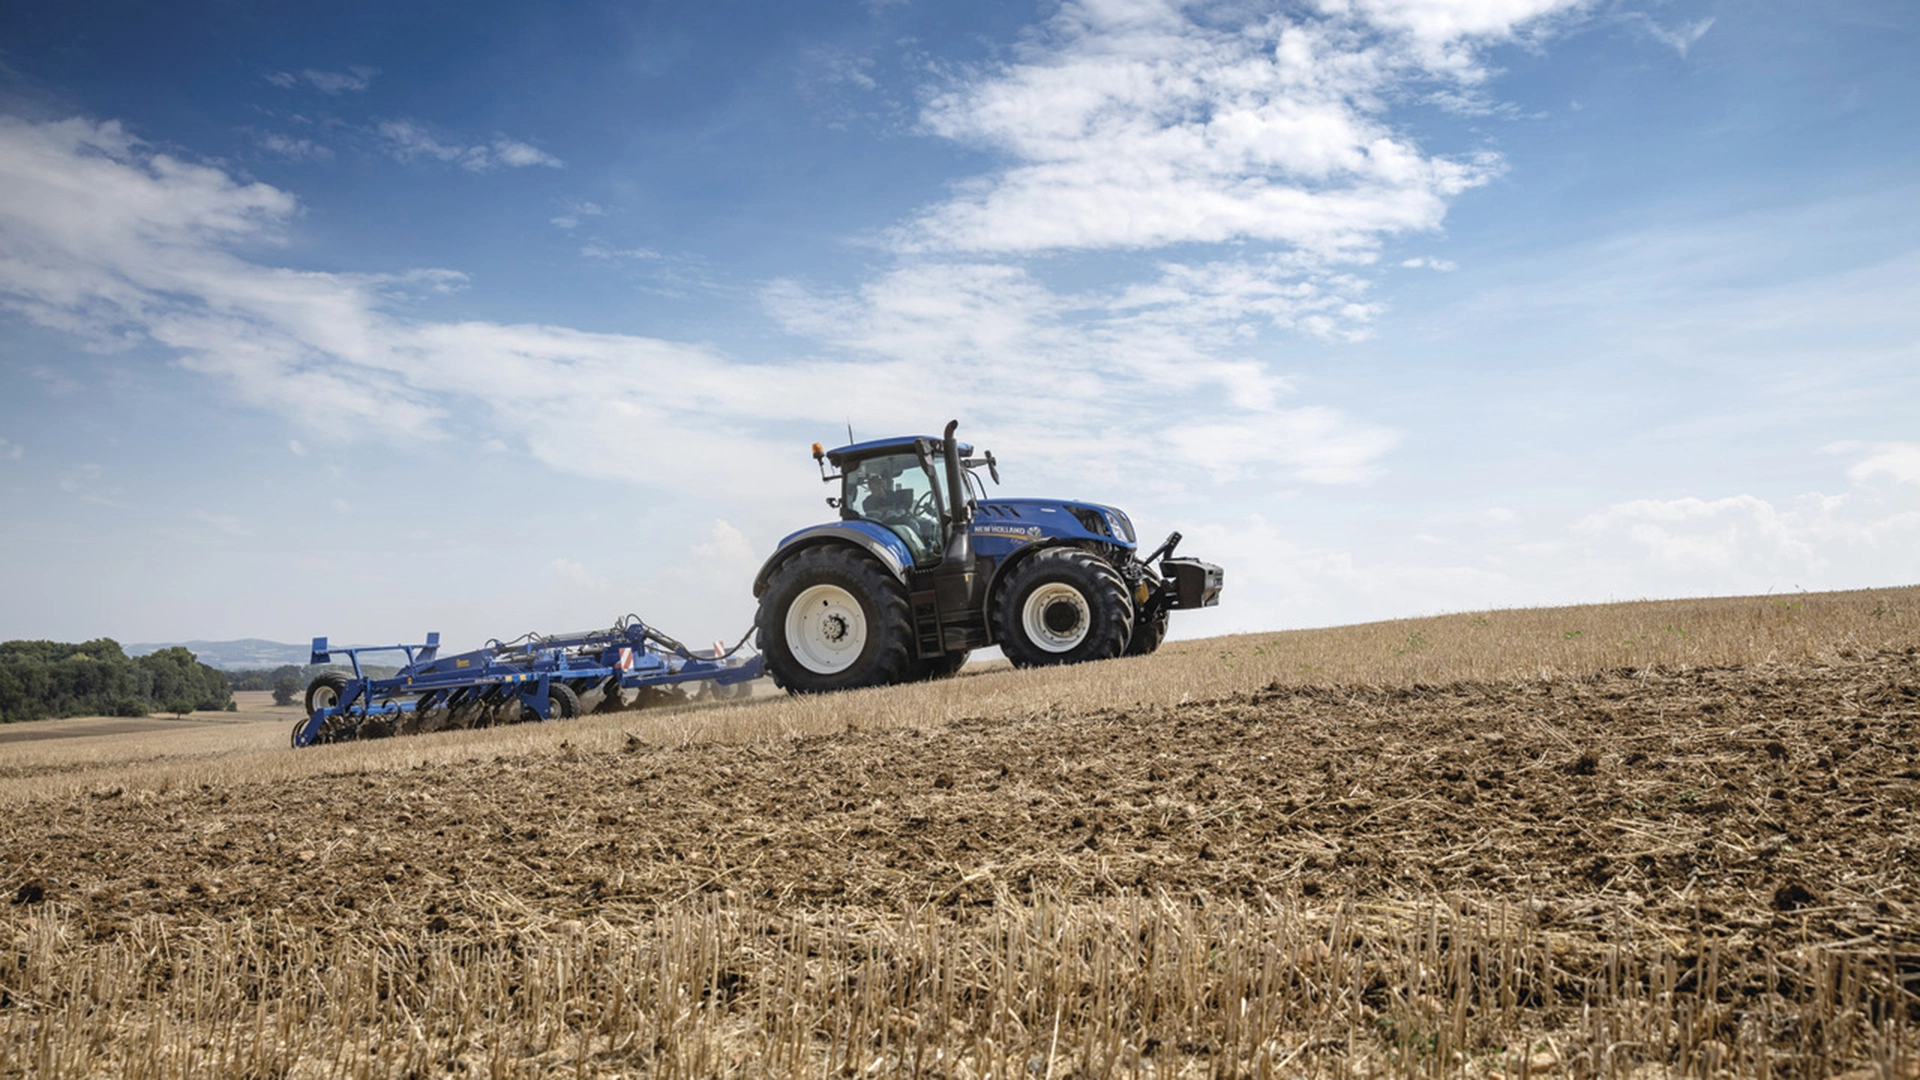 New Holland tractor employing a mounted stubble cultivator with rigid tine cultivator, discs and rear rollers on the field